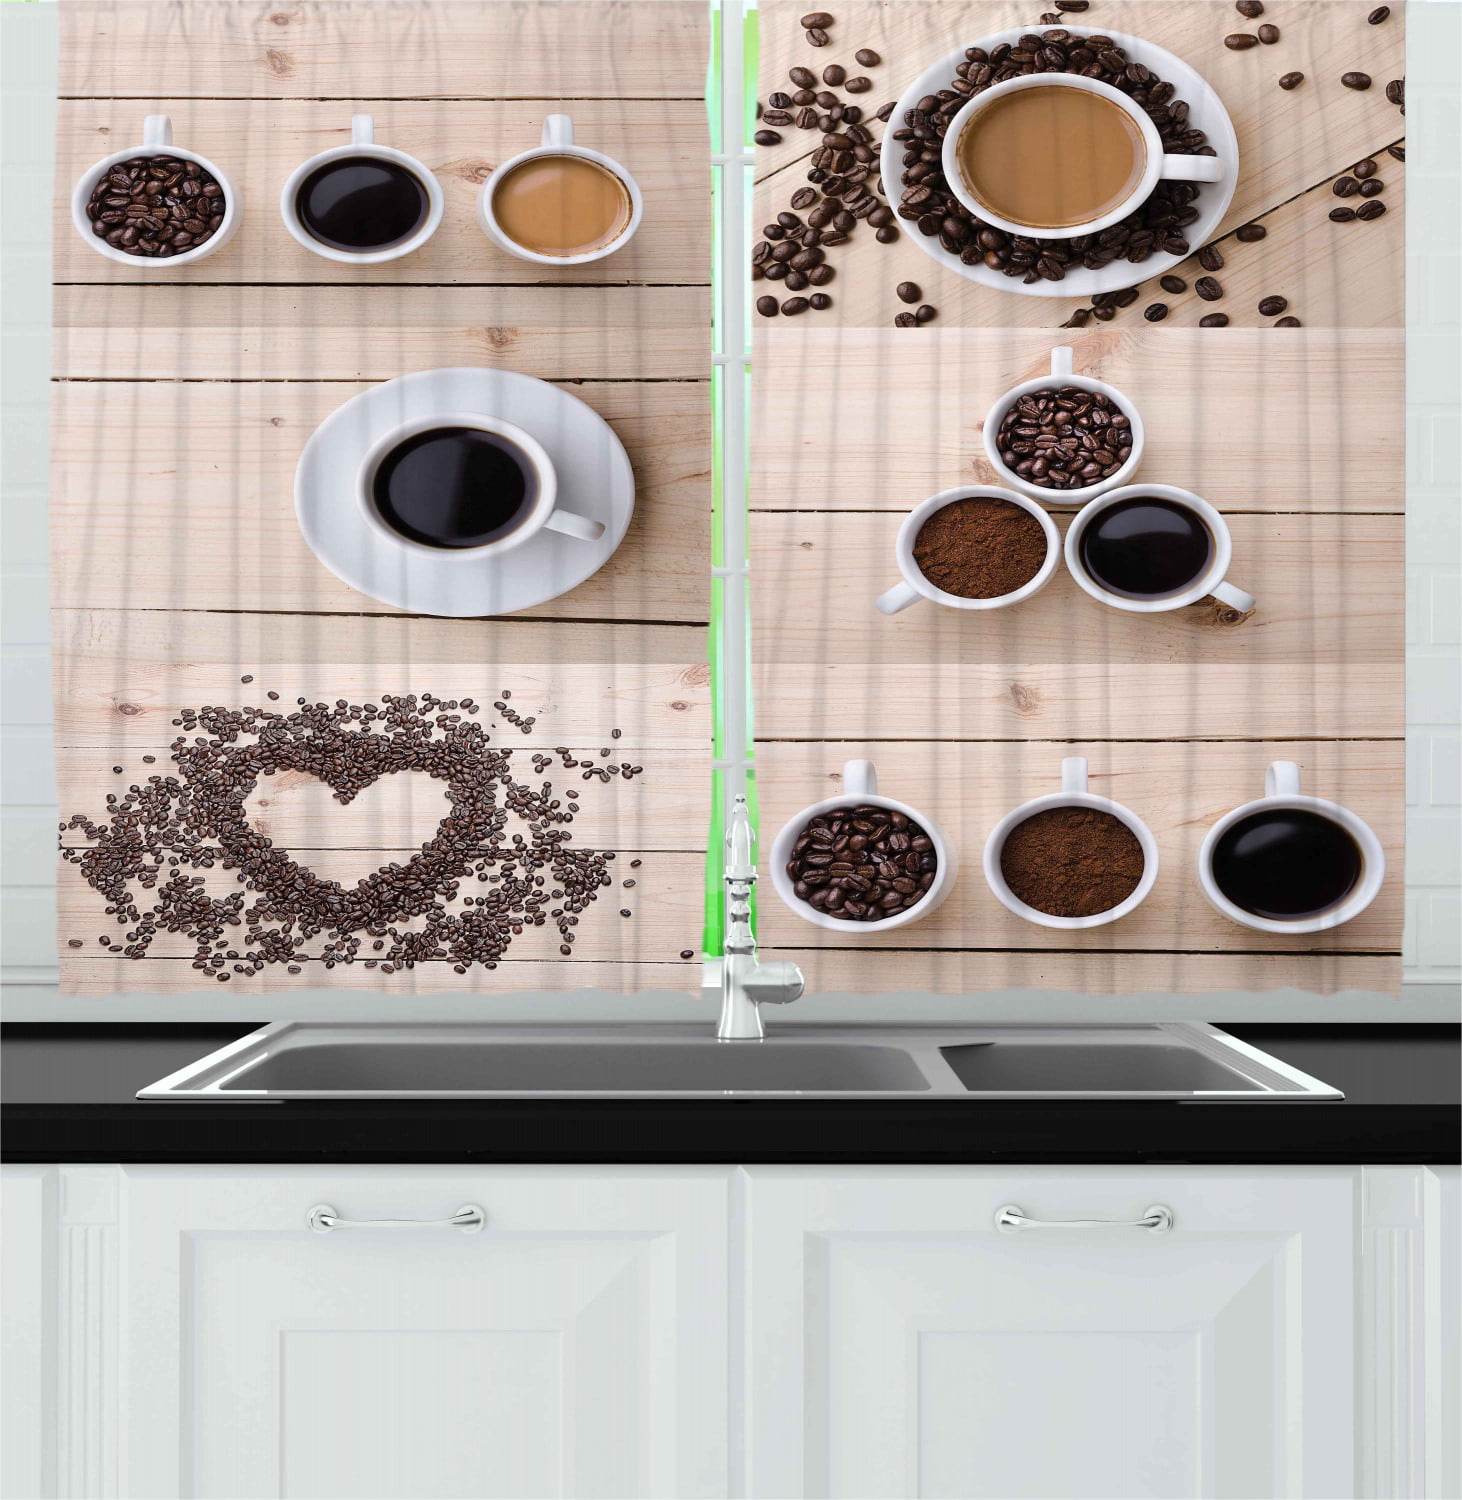 KFUTMD Roman Shades Kitchen Collage of Different Coffee Details on Wooden Table Mugs Beans Organic Concept Brown Black Tan Tie Up Curtains for Windows 23x64 Inch